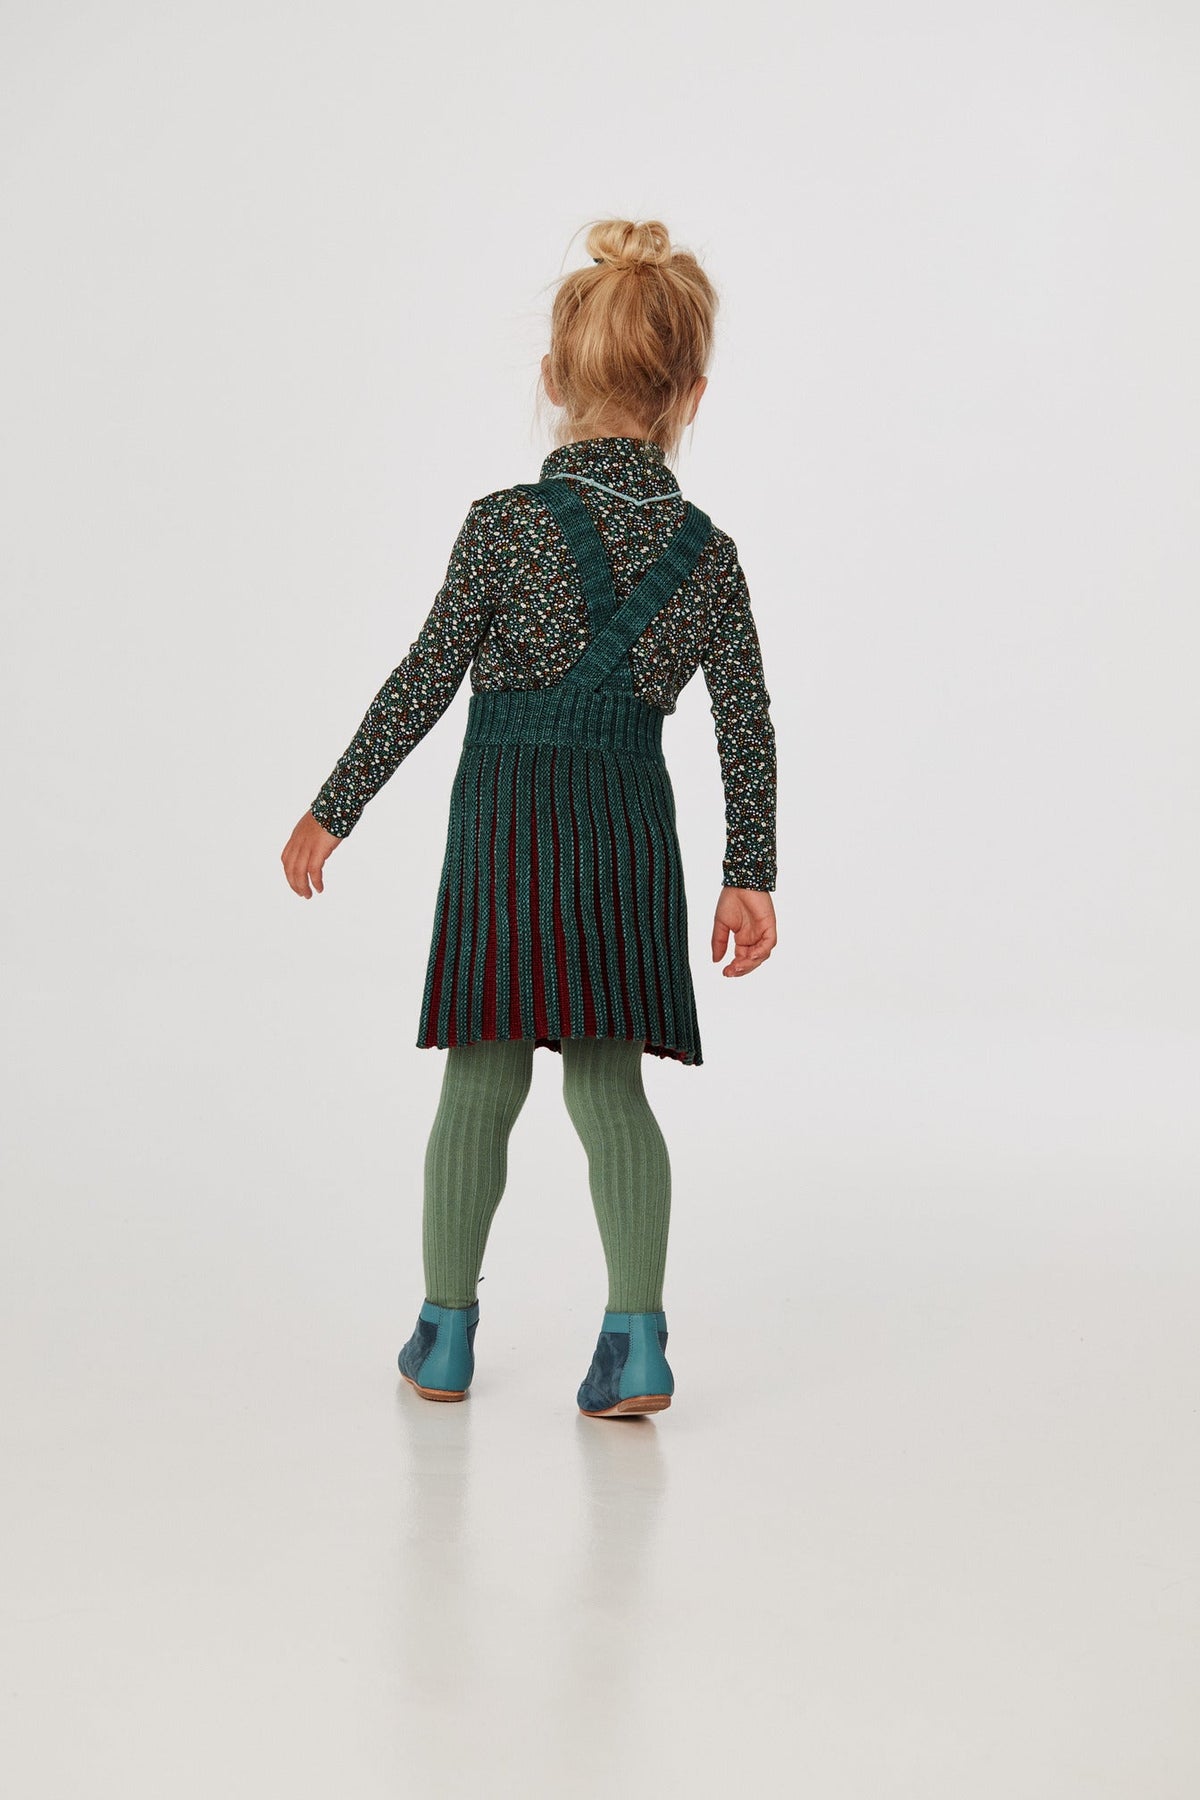 Accordion Pleat Pinafore - Peacock+Model is 41 inches tall, 38lbs, wearing a size 4-5y